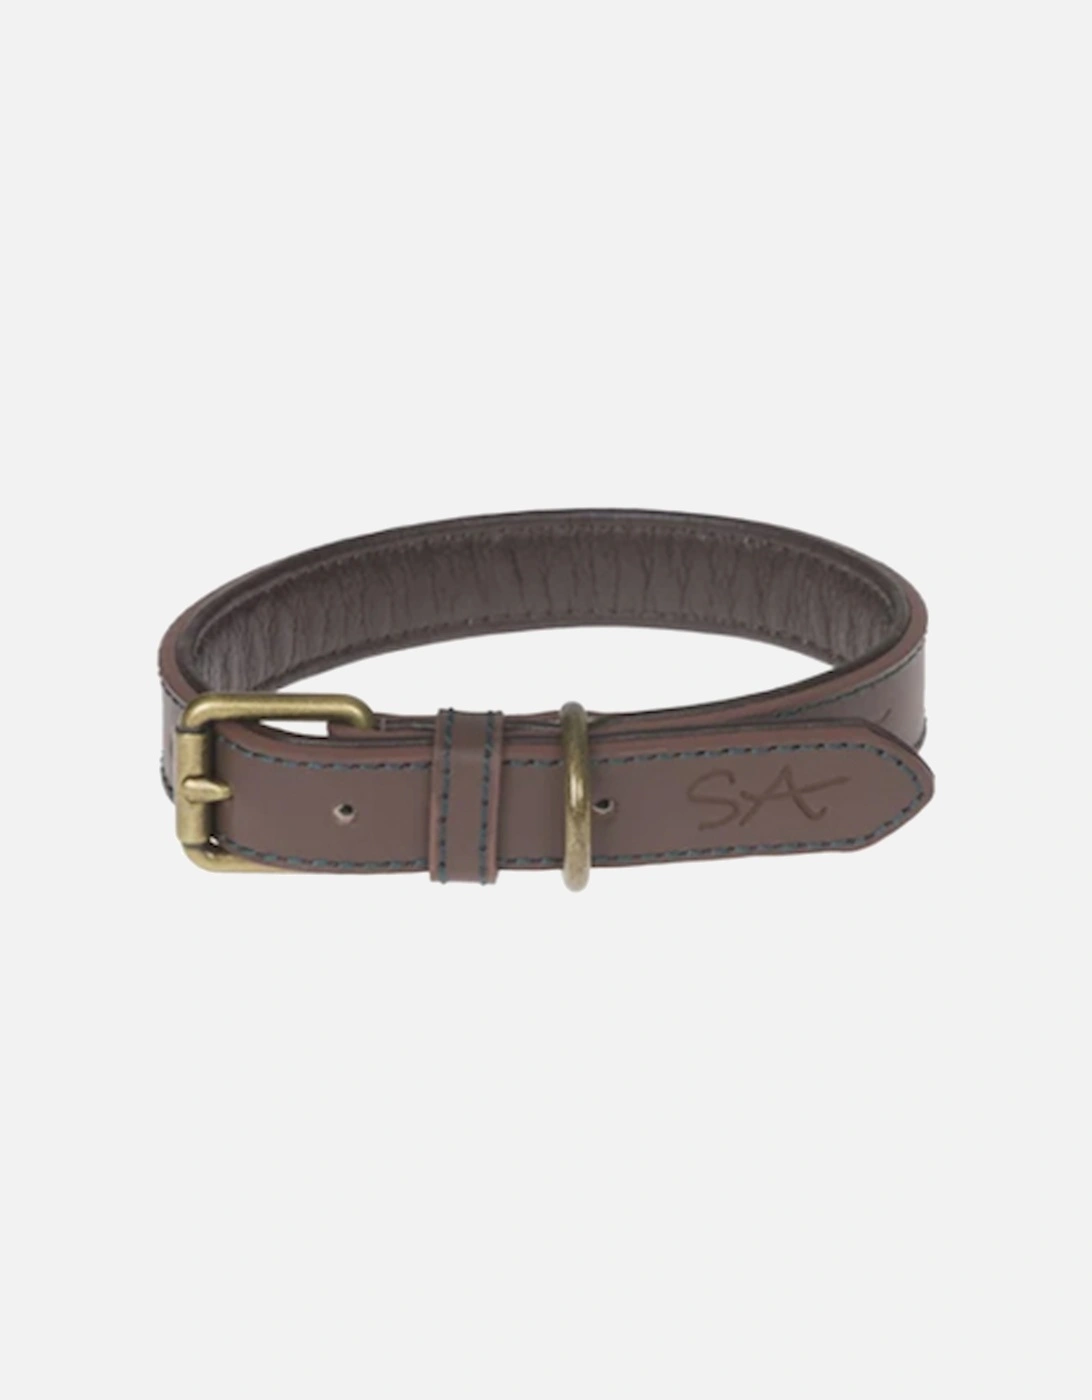 Woof Leather Dog Collar